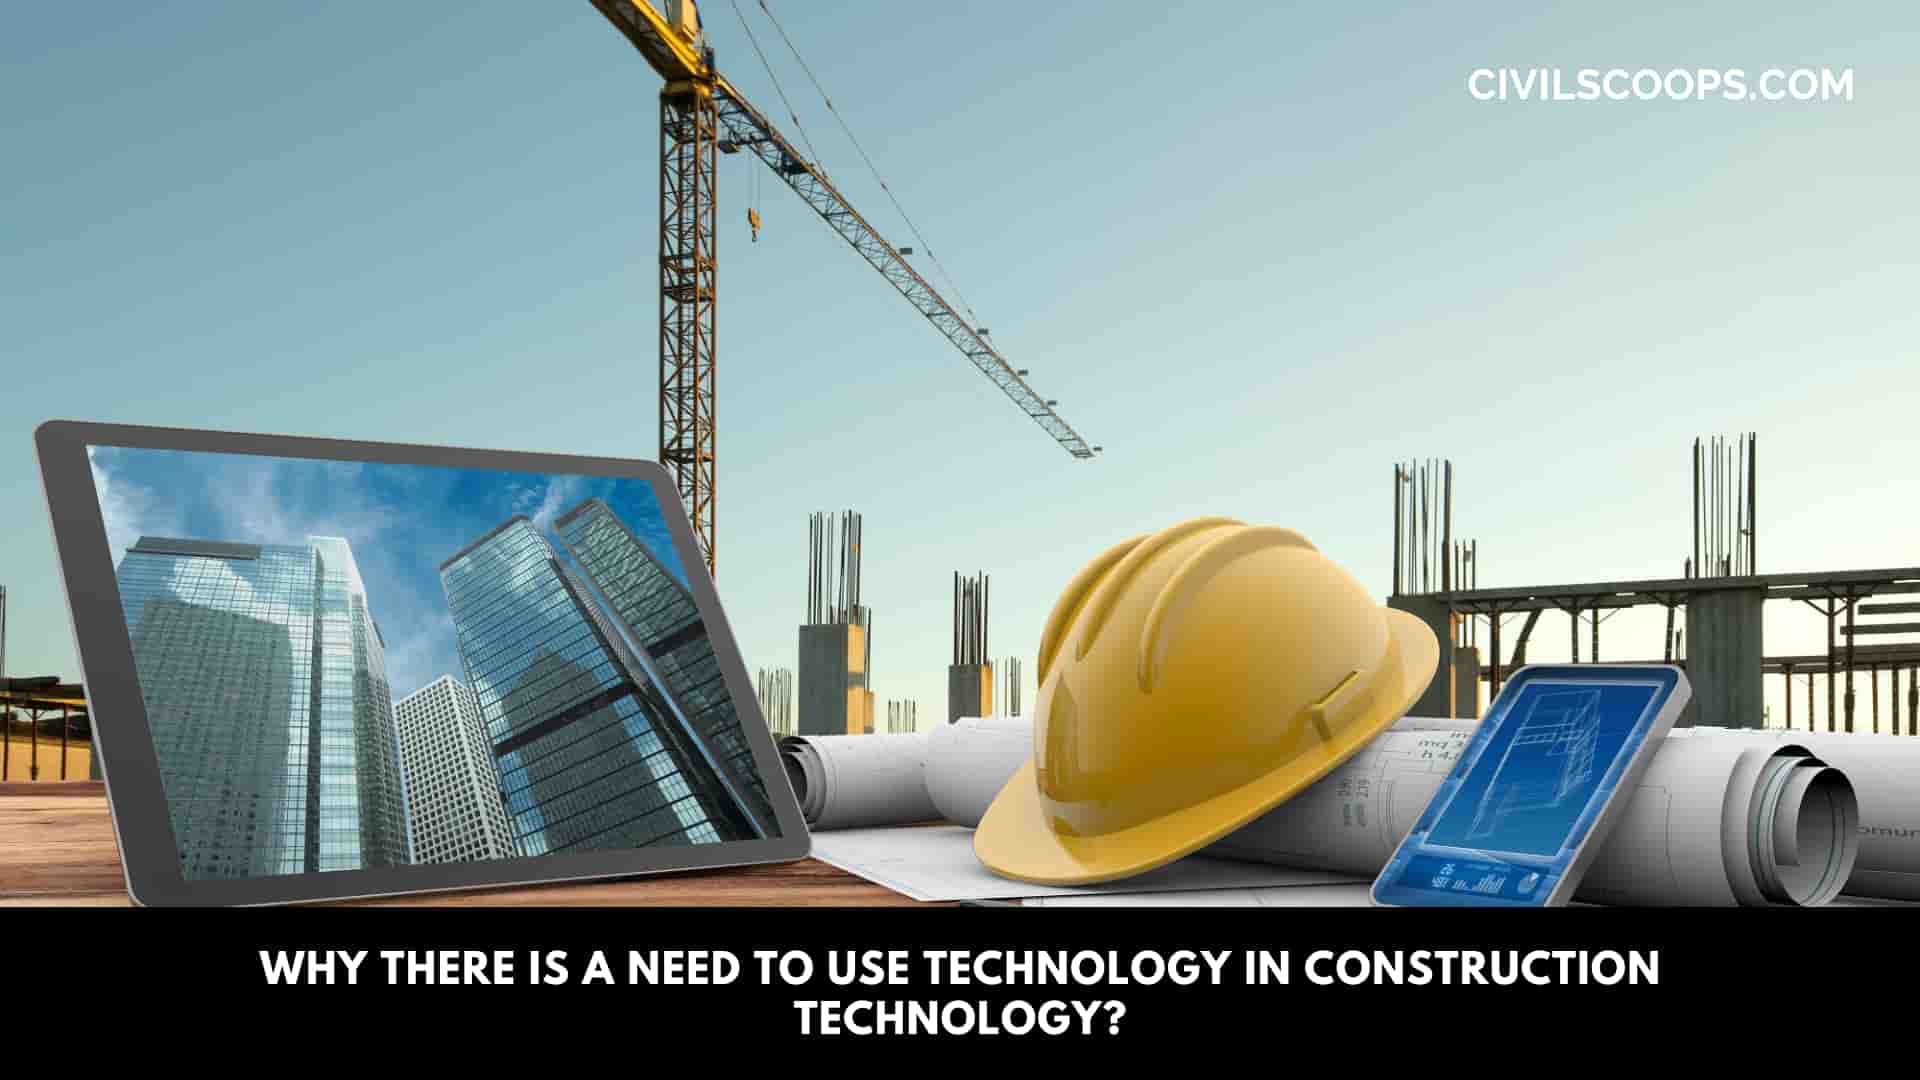 Why There Is a Need to Use Technology in Construction Technology?